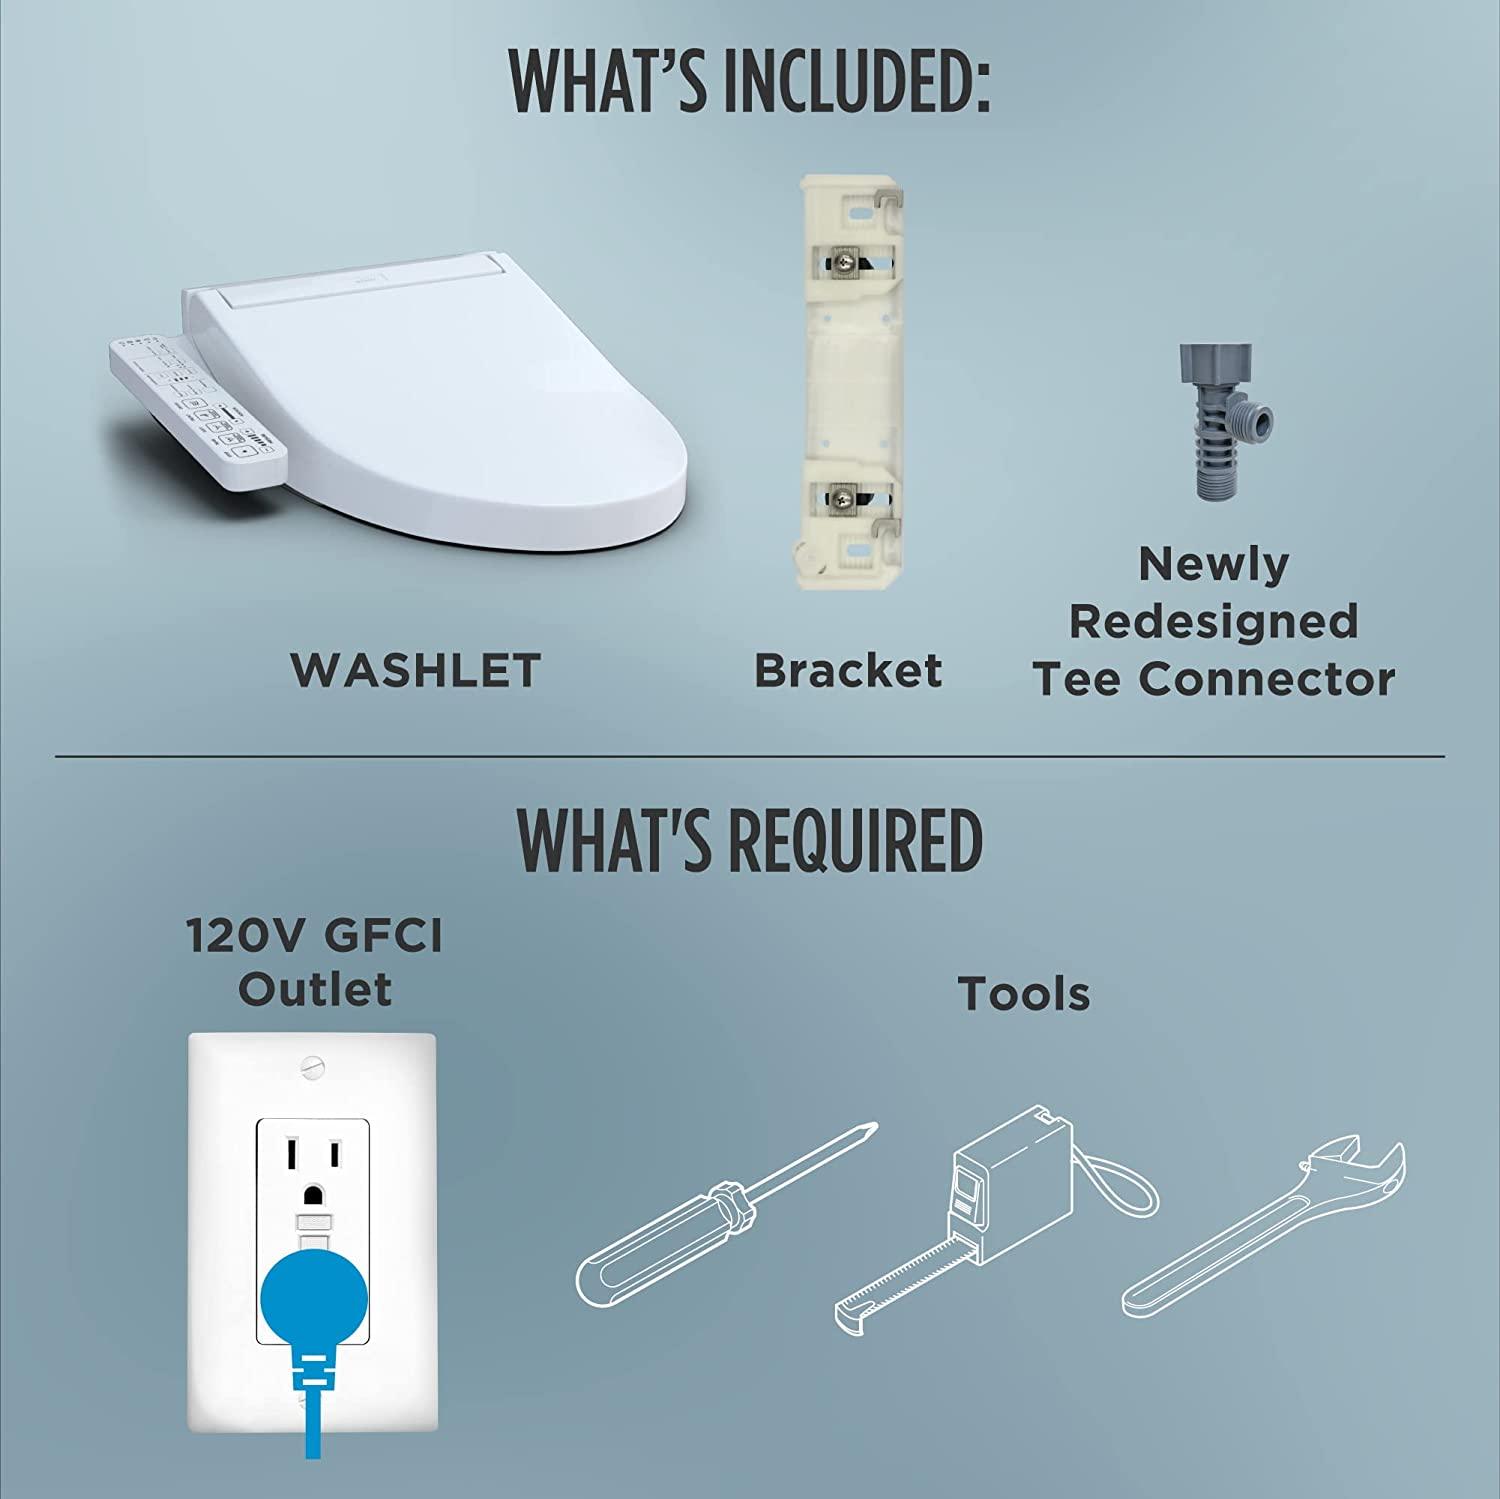 TOTO WASHLET KC2,Electronic Bidet Toilet Seat with Heated Seat and SoftClose Lid, Cotton White - YOURISHOP.COM